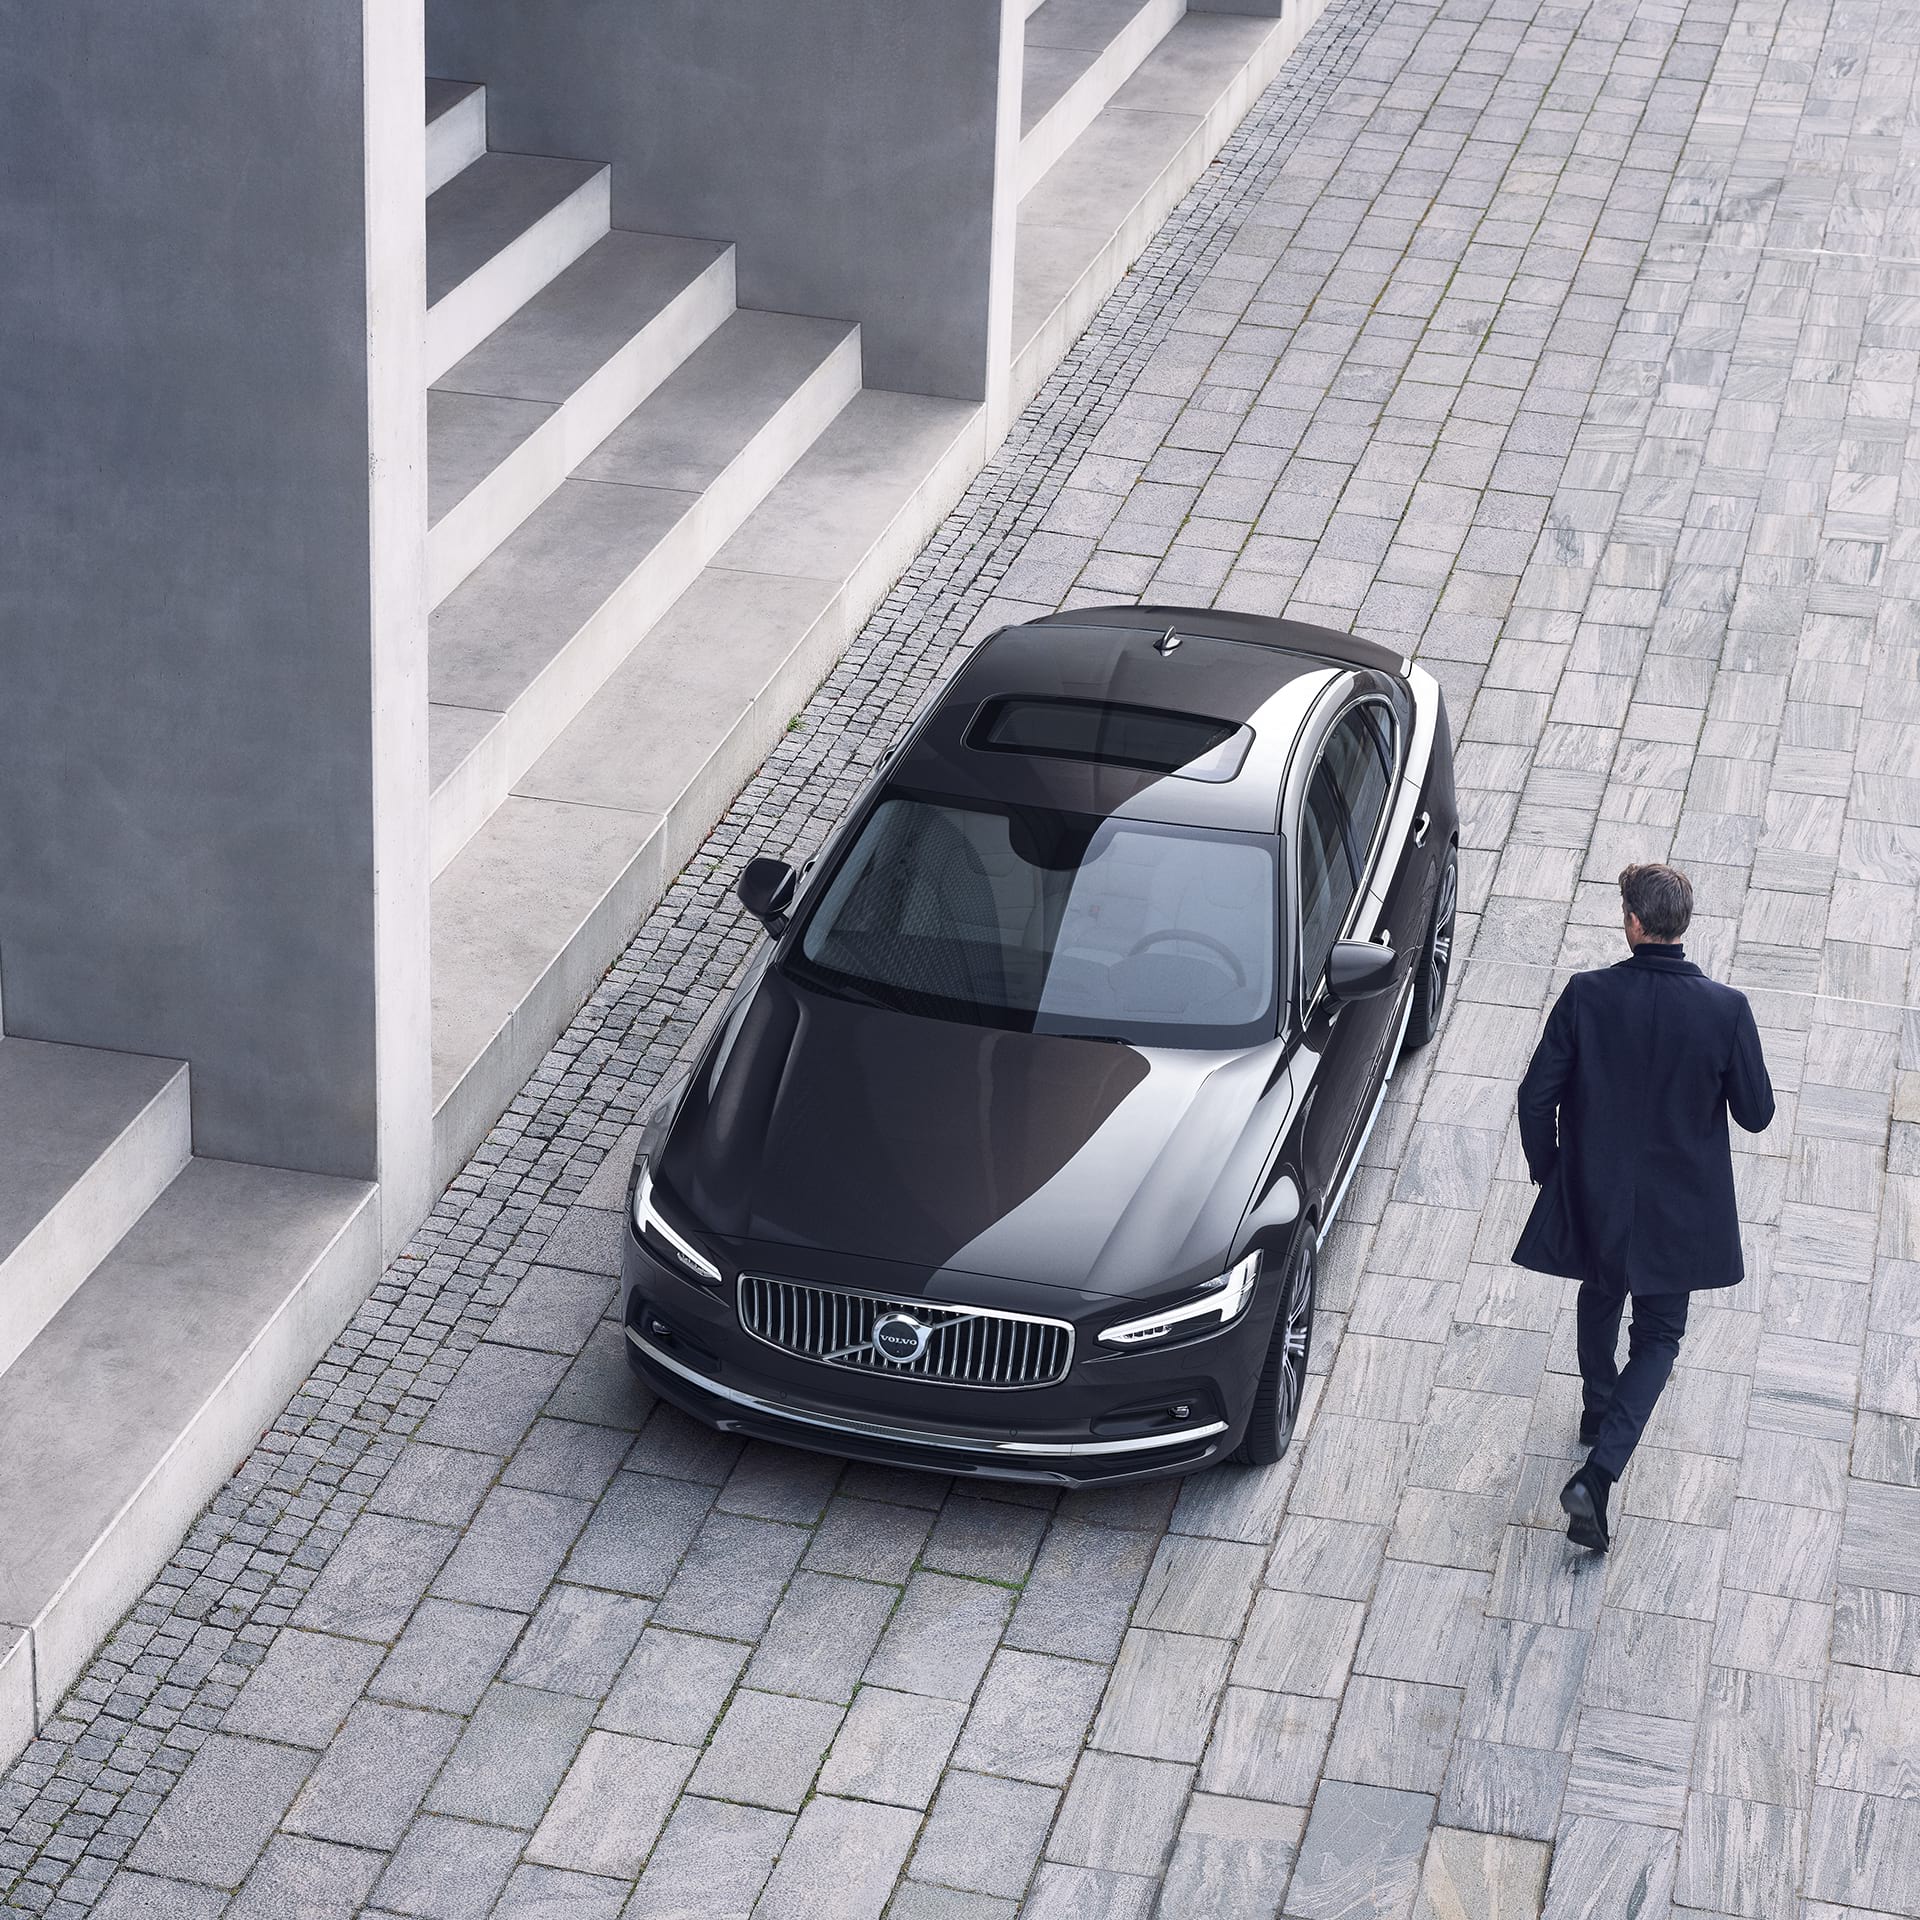 A Volvo S90 is parked in front of a set of stairs, a man walks towards the car